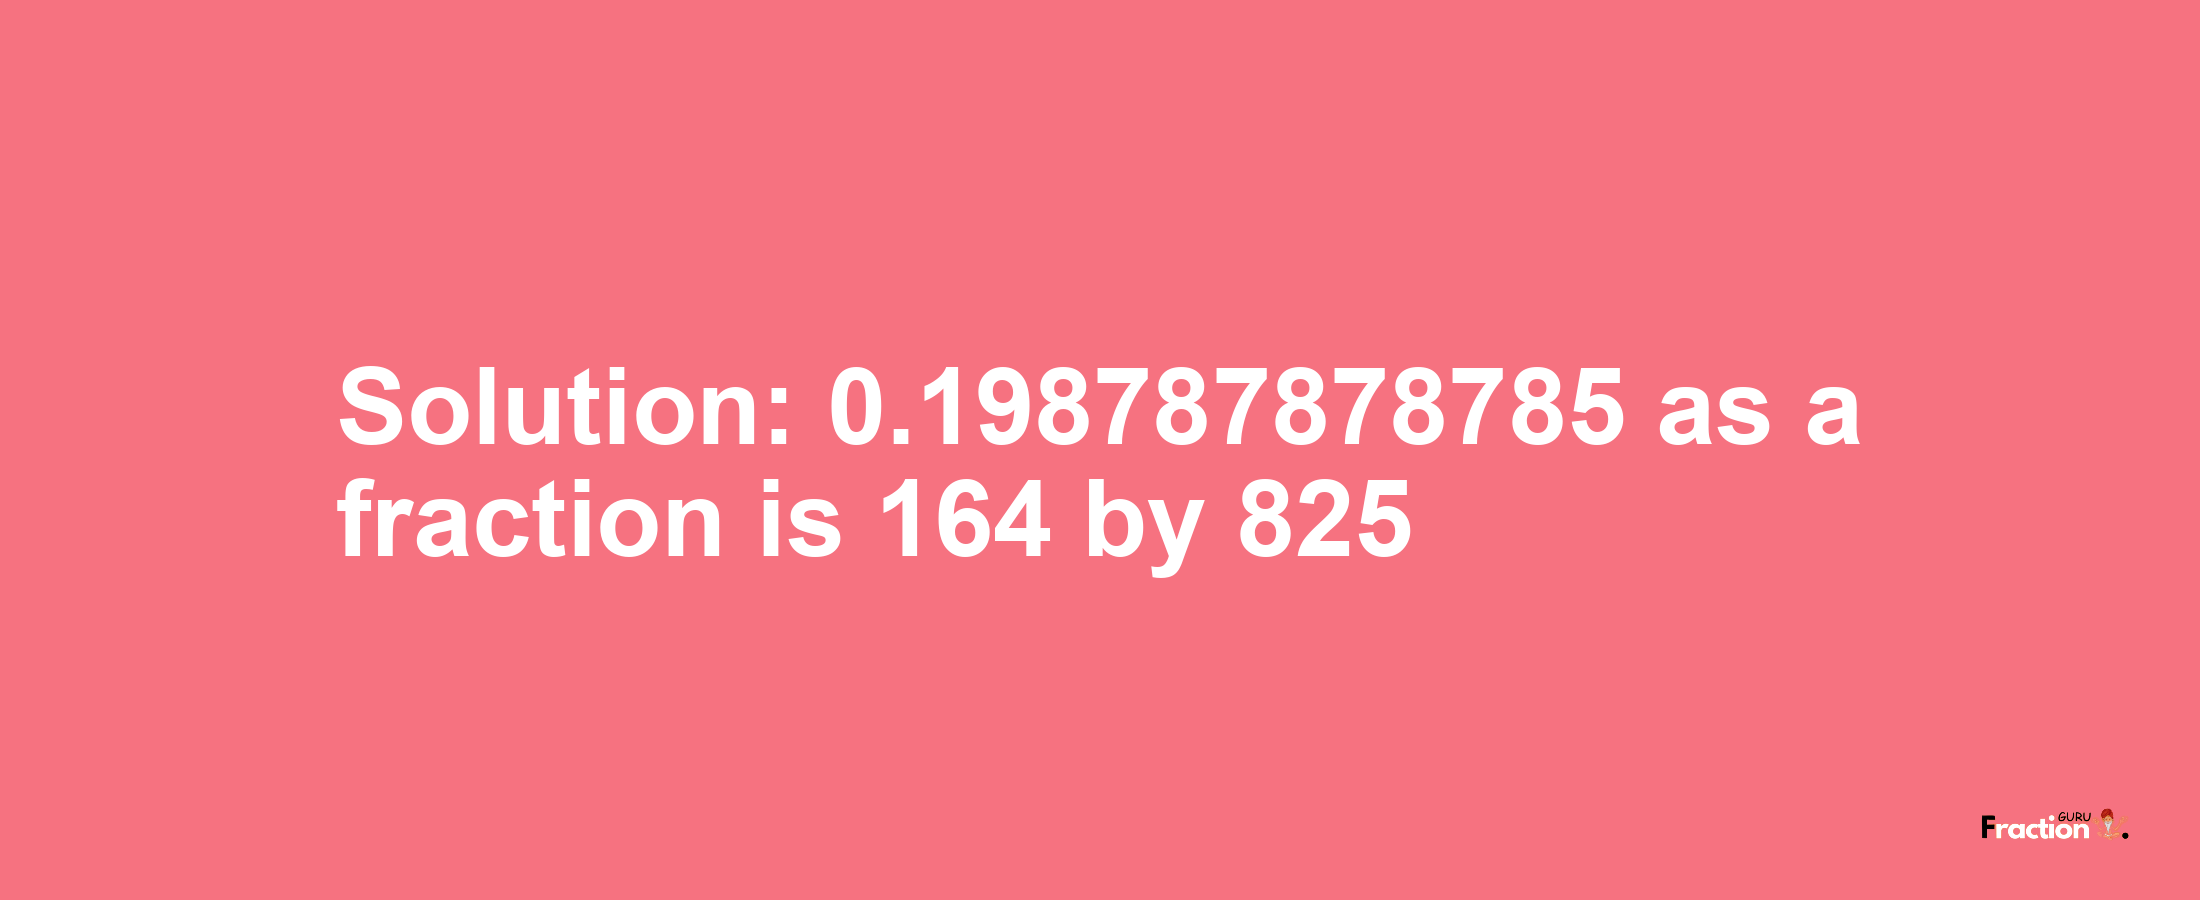 Solution:0.198787878785 as a fraction is 164/825